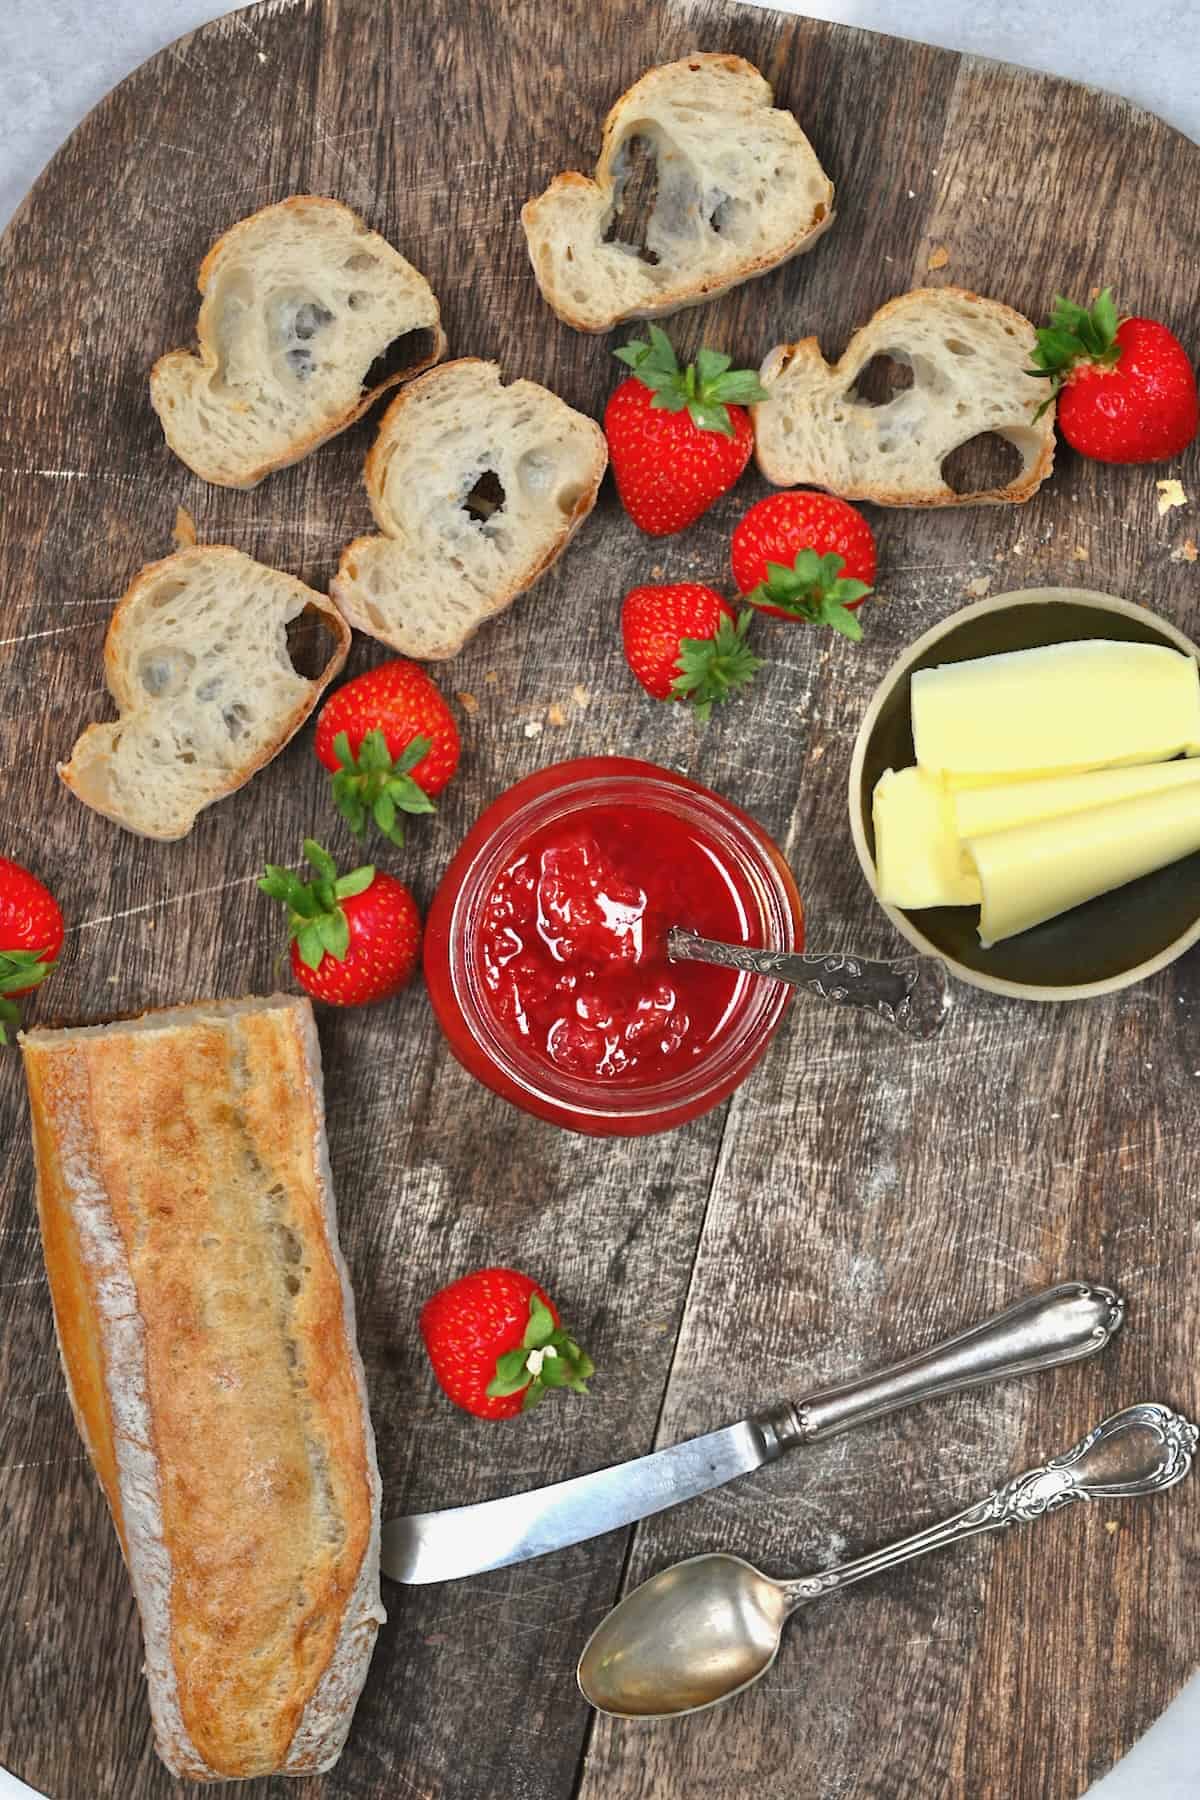 Strawberry jam to be served with butter on bread